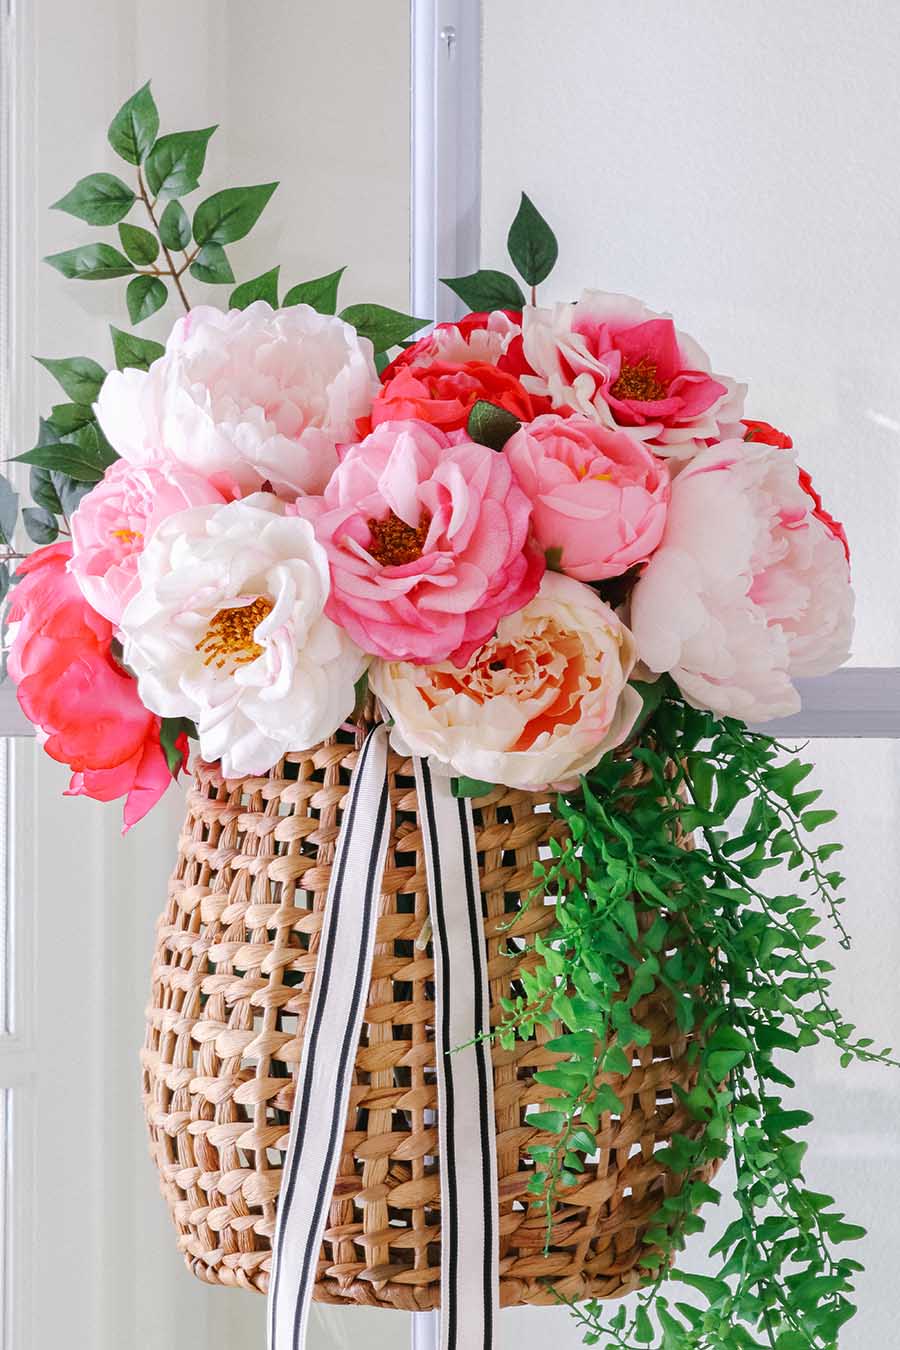 A wicker basket filled with pink and white flowers and green branches.